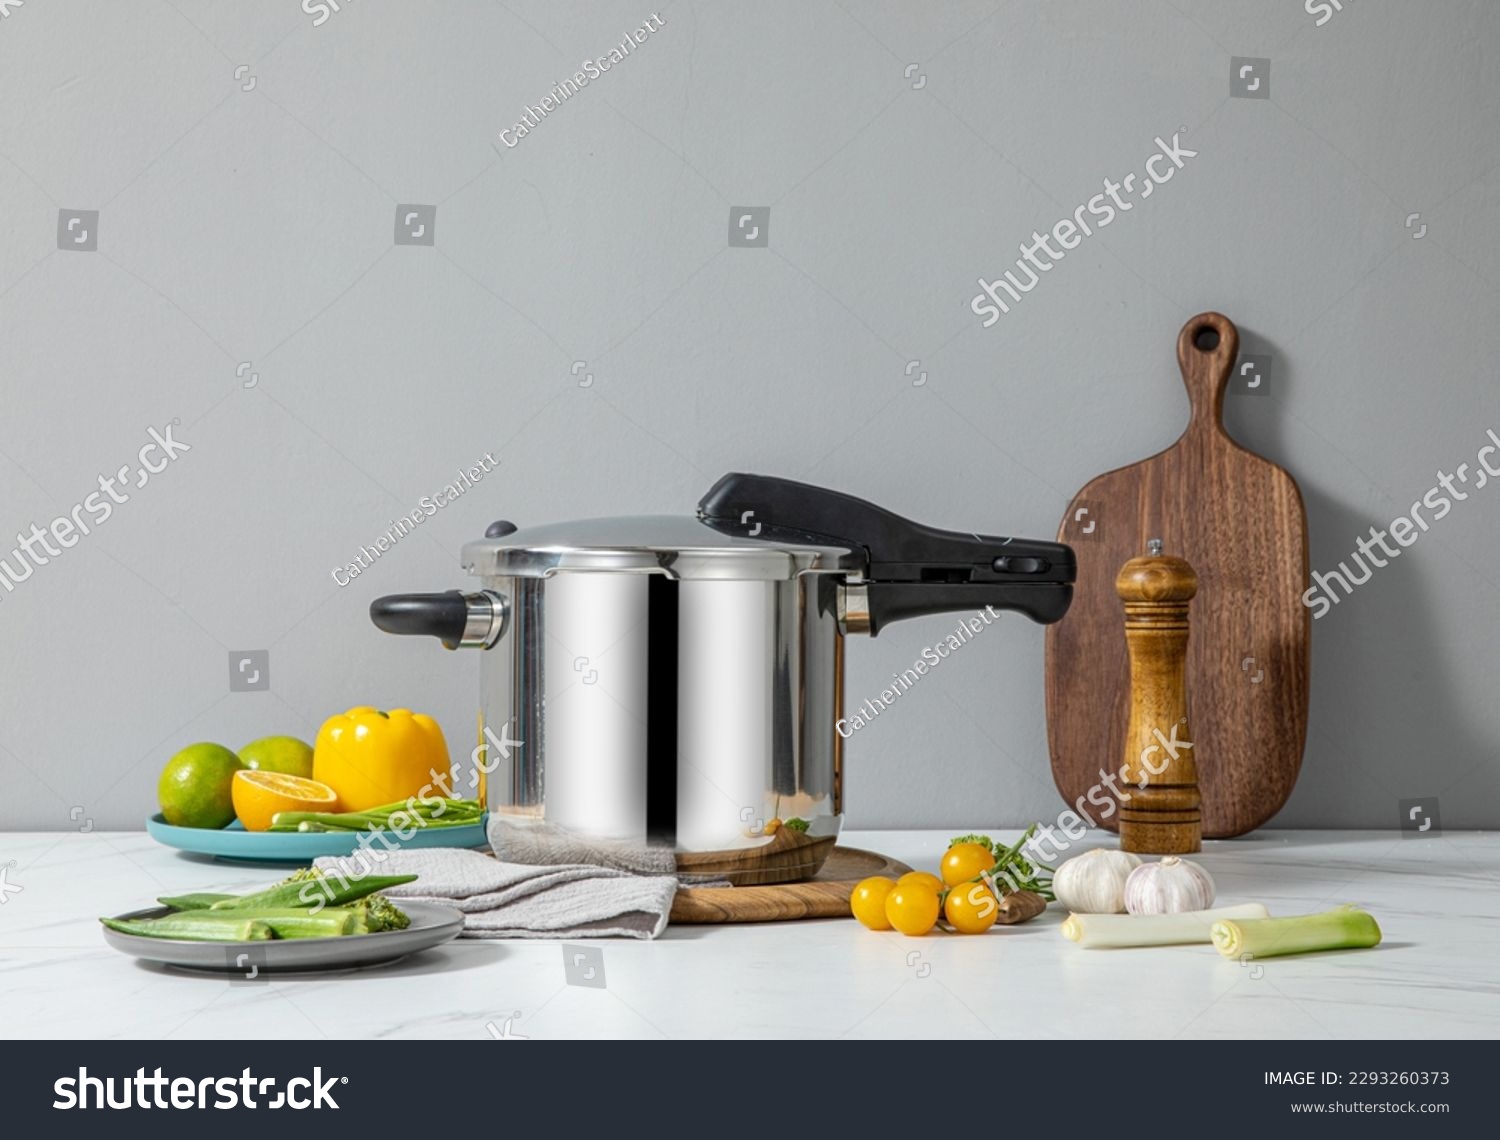 The scene of using a pressure cooker to make soup and cook dishes in the kitchen, marble countertop background, wood grain desktop. #2293260373